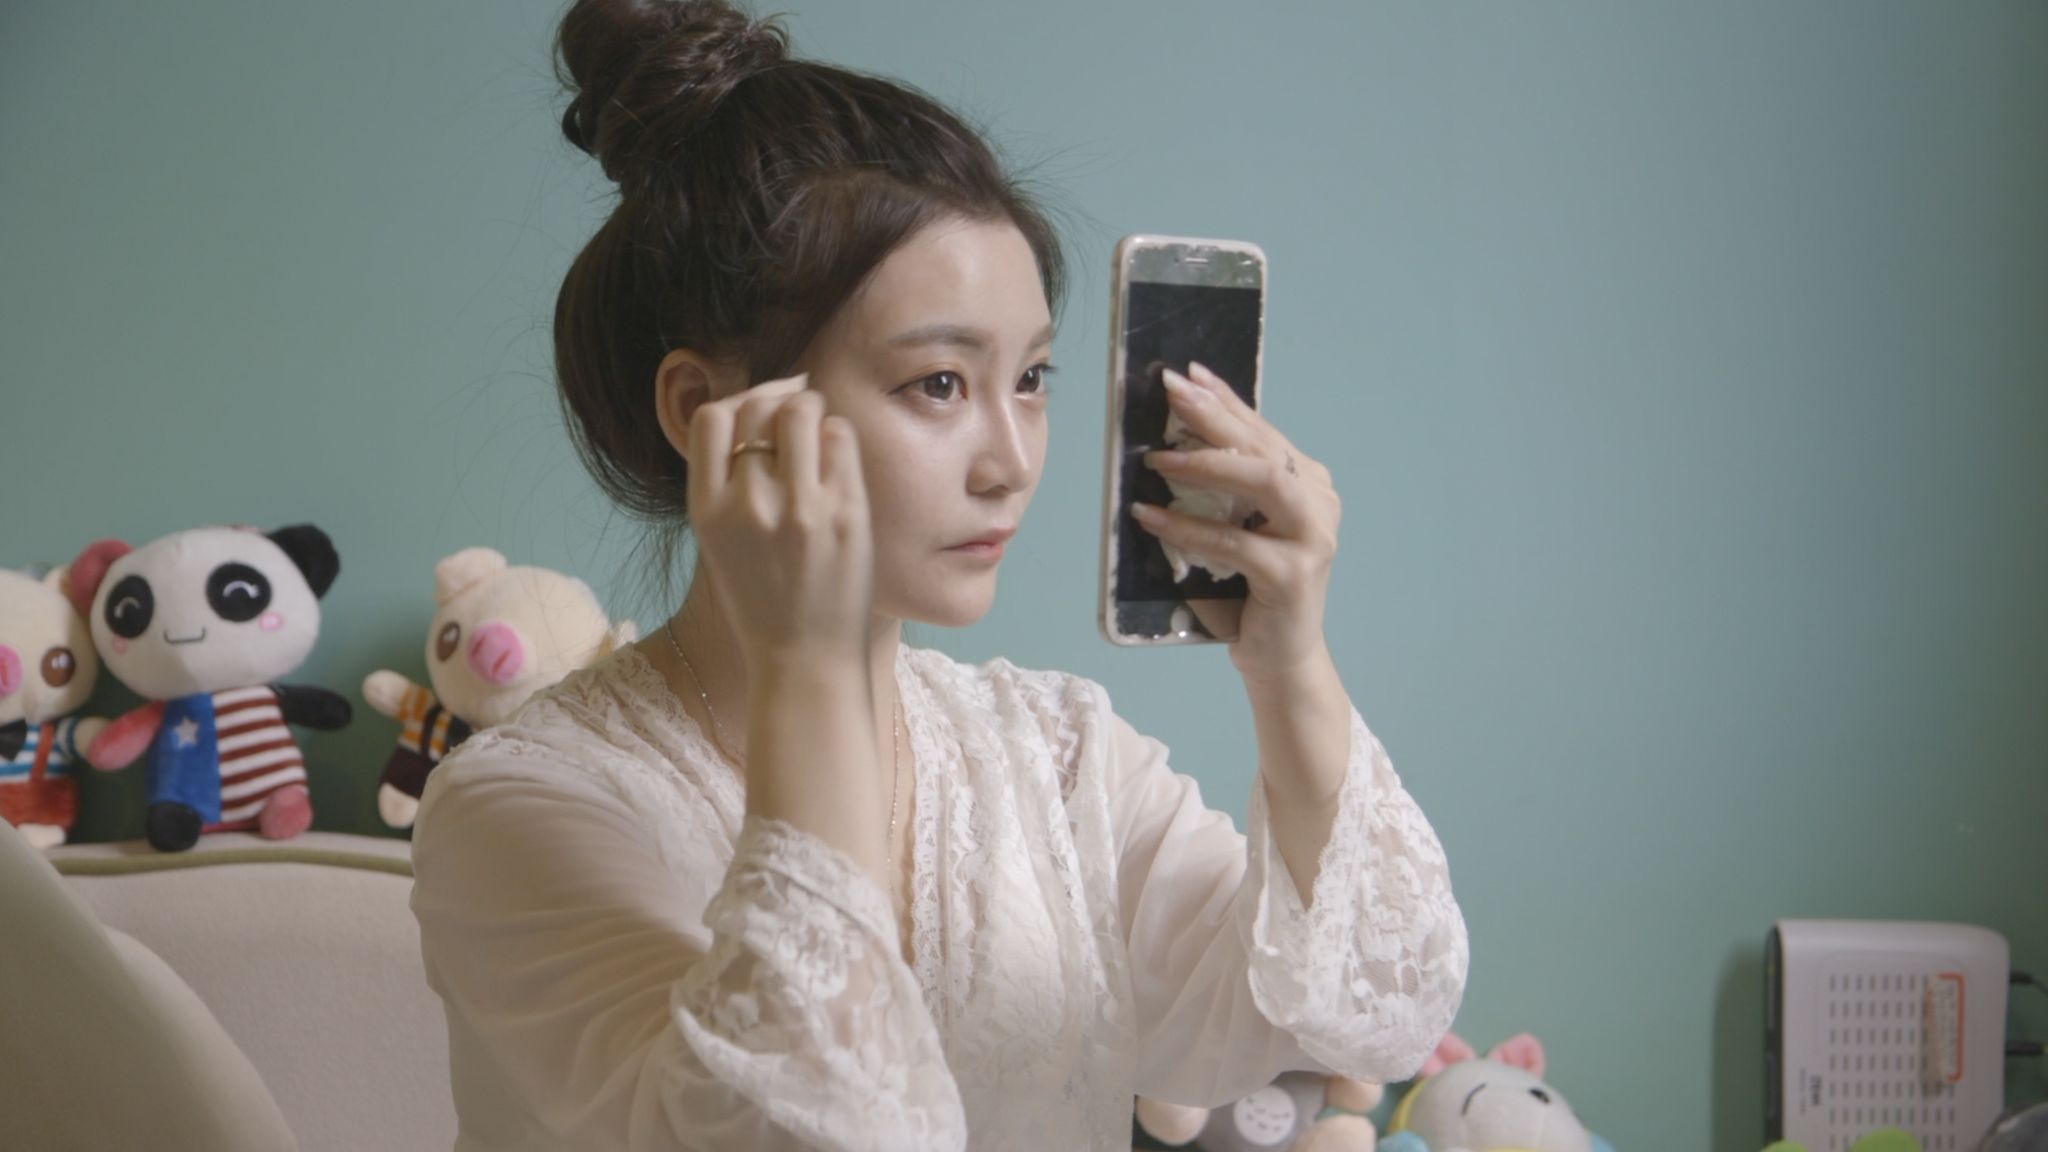 Lele Tao puts on make-up in her night gown.